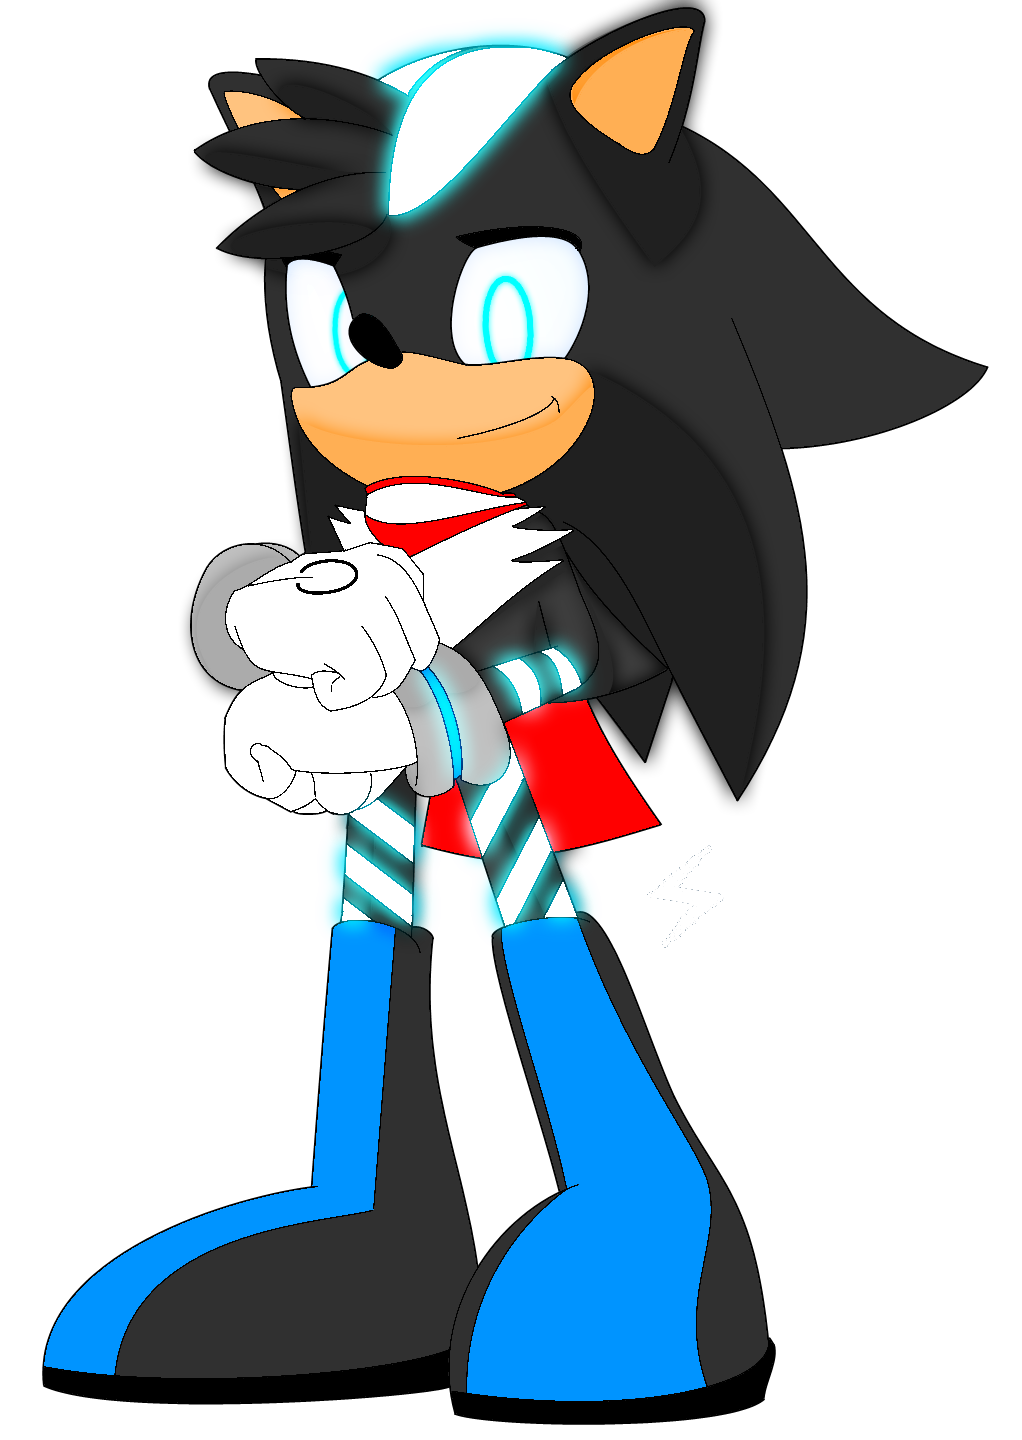 remember_that_one_electric_hedgehog__by_tesla_that_hedgehog-d8i2hxe.png